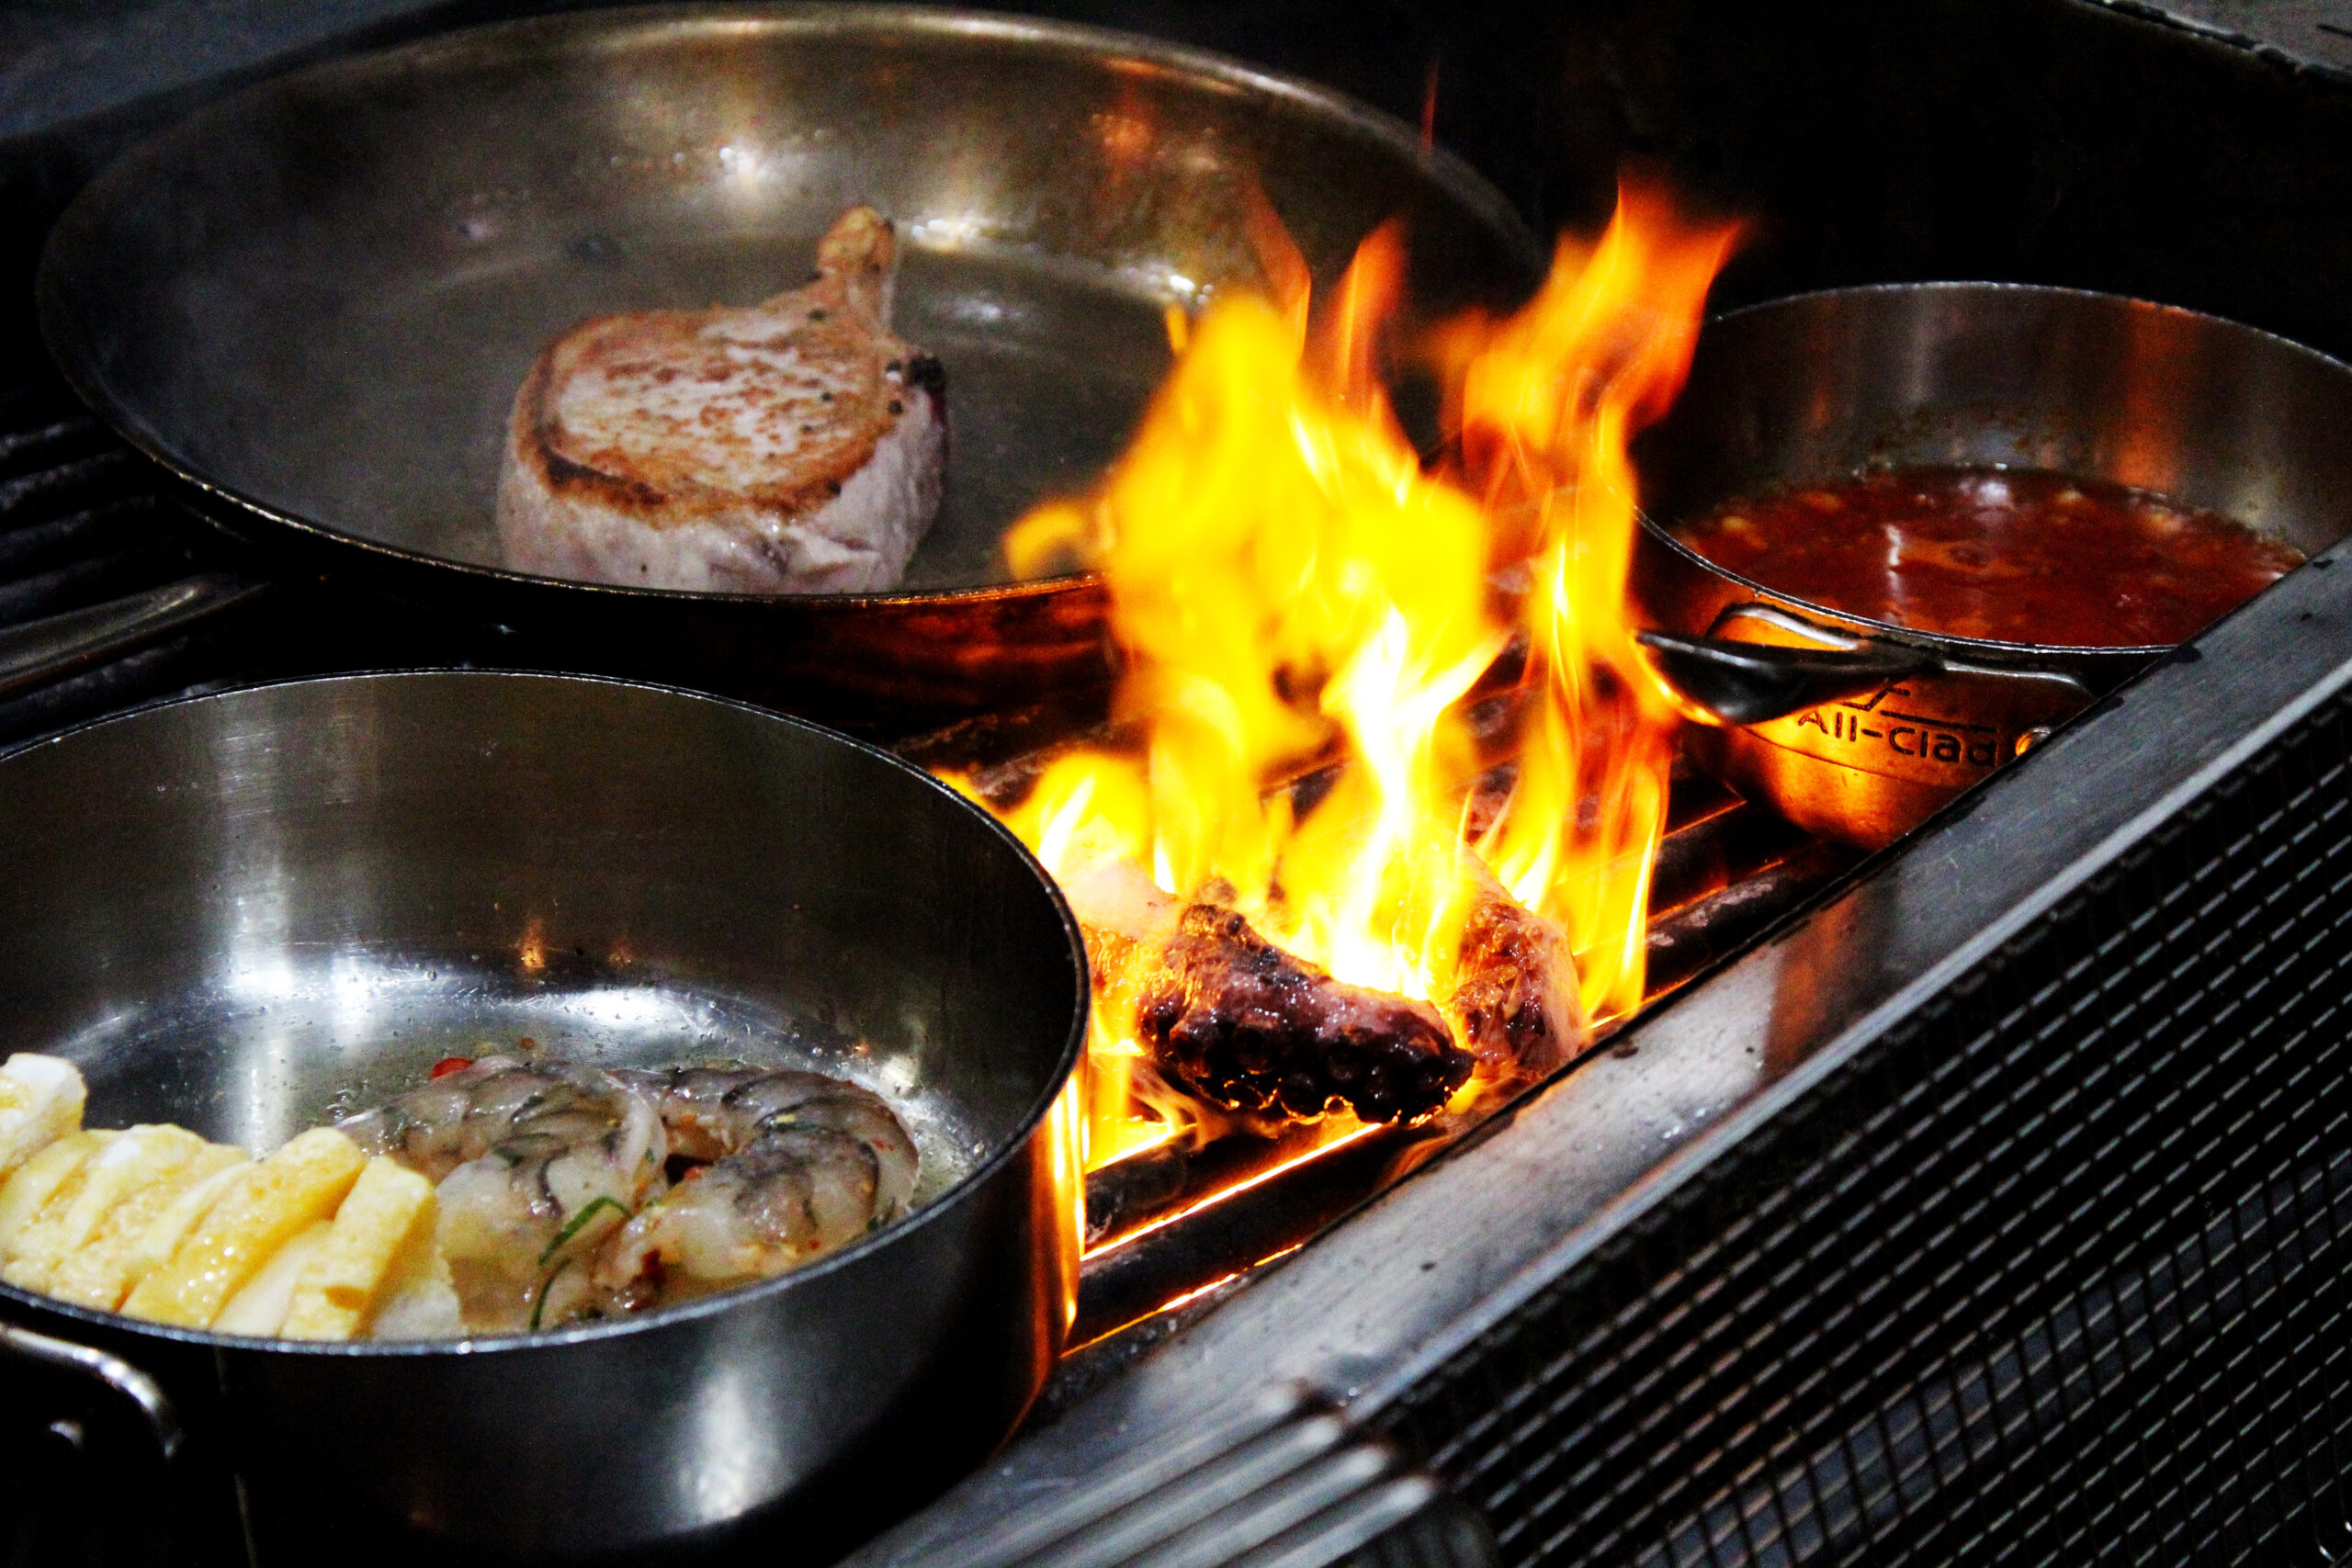 octopus flaming on the grill next to a pan searing pork, one with shrimp, and a pot with a red sauce